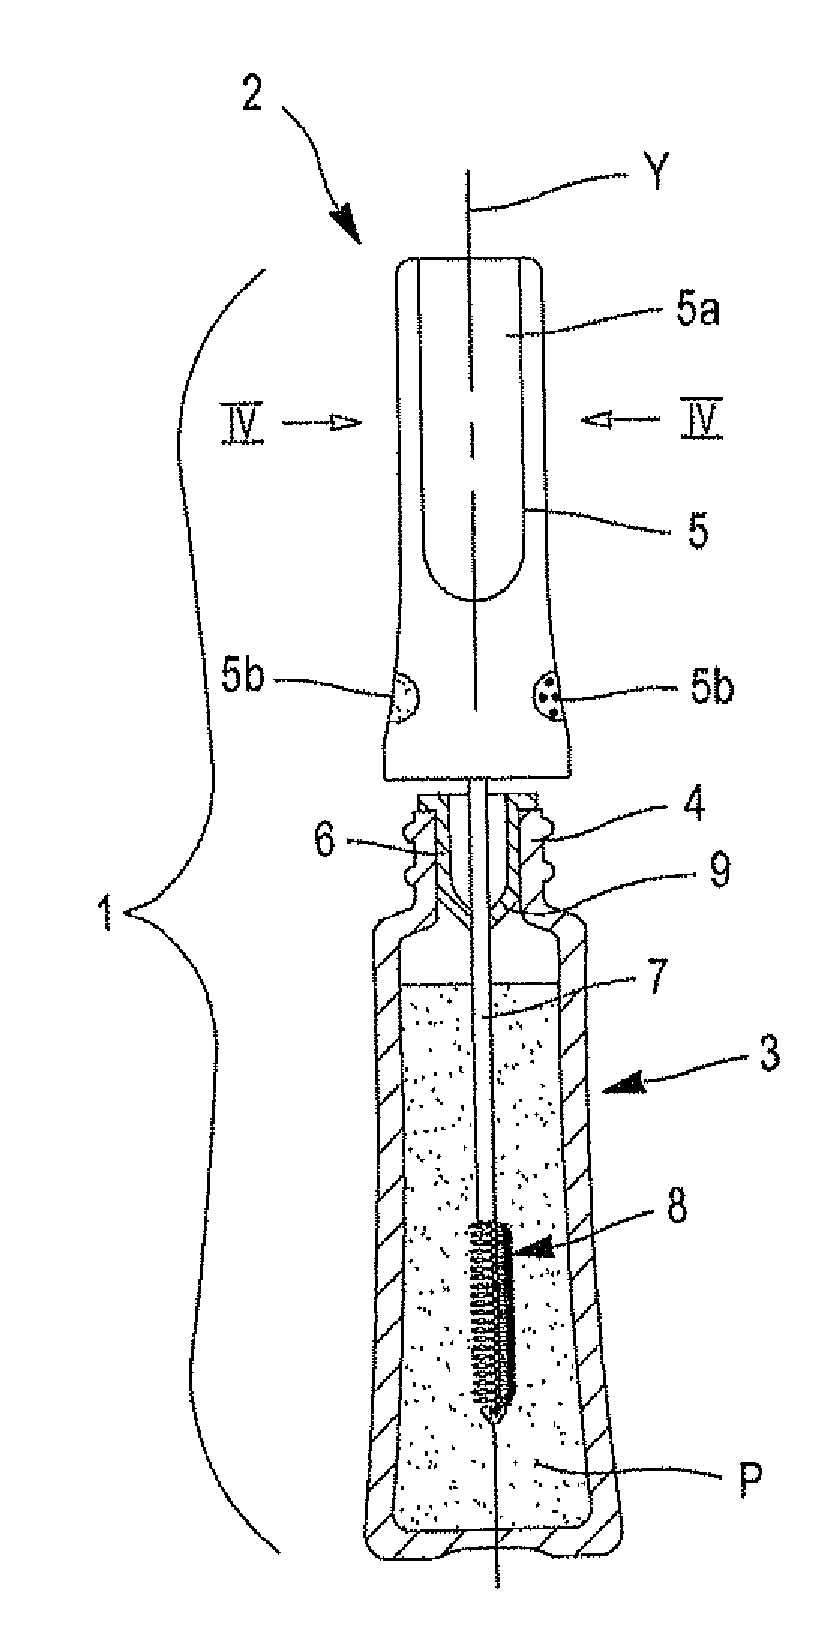 Applicator for applying a composition to keratinous materials